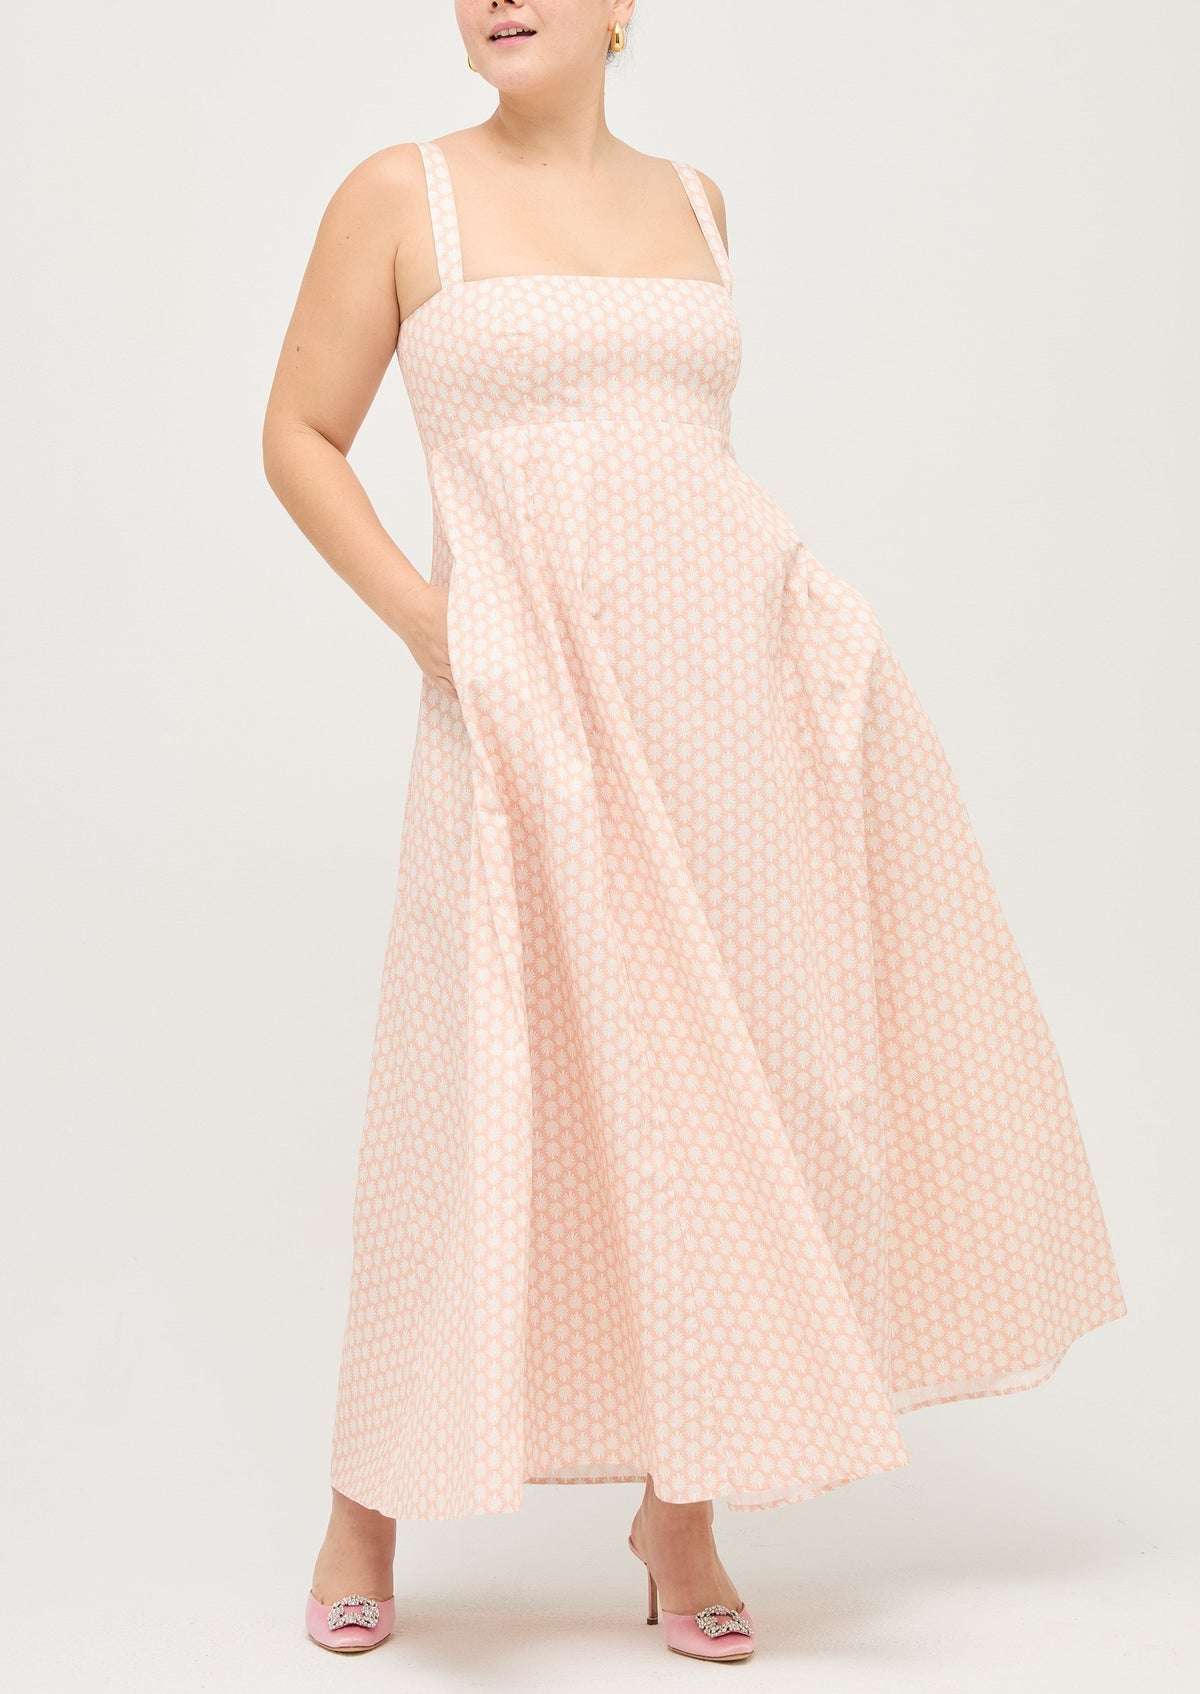 The Rowena Dress in Coral Baroque Shell Cotton Sateen